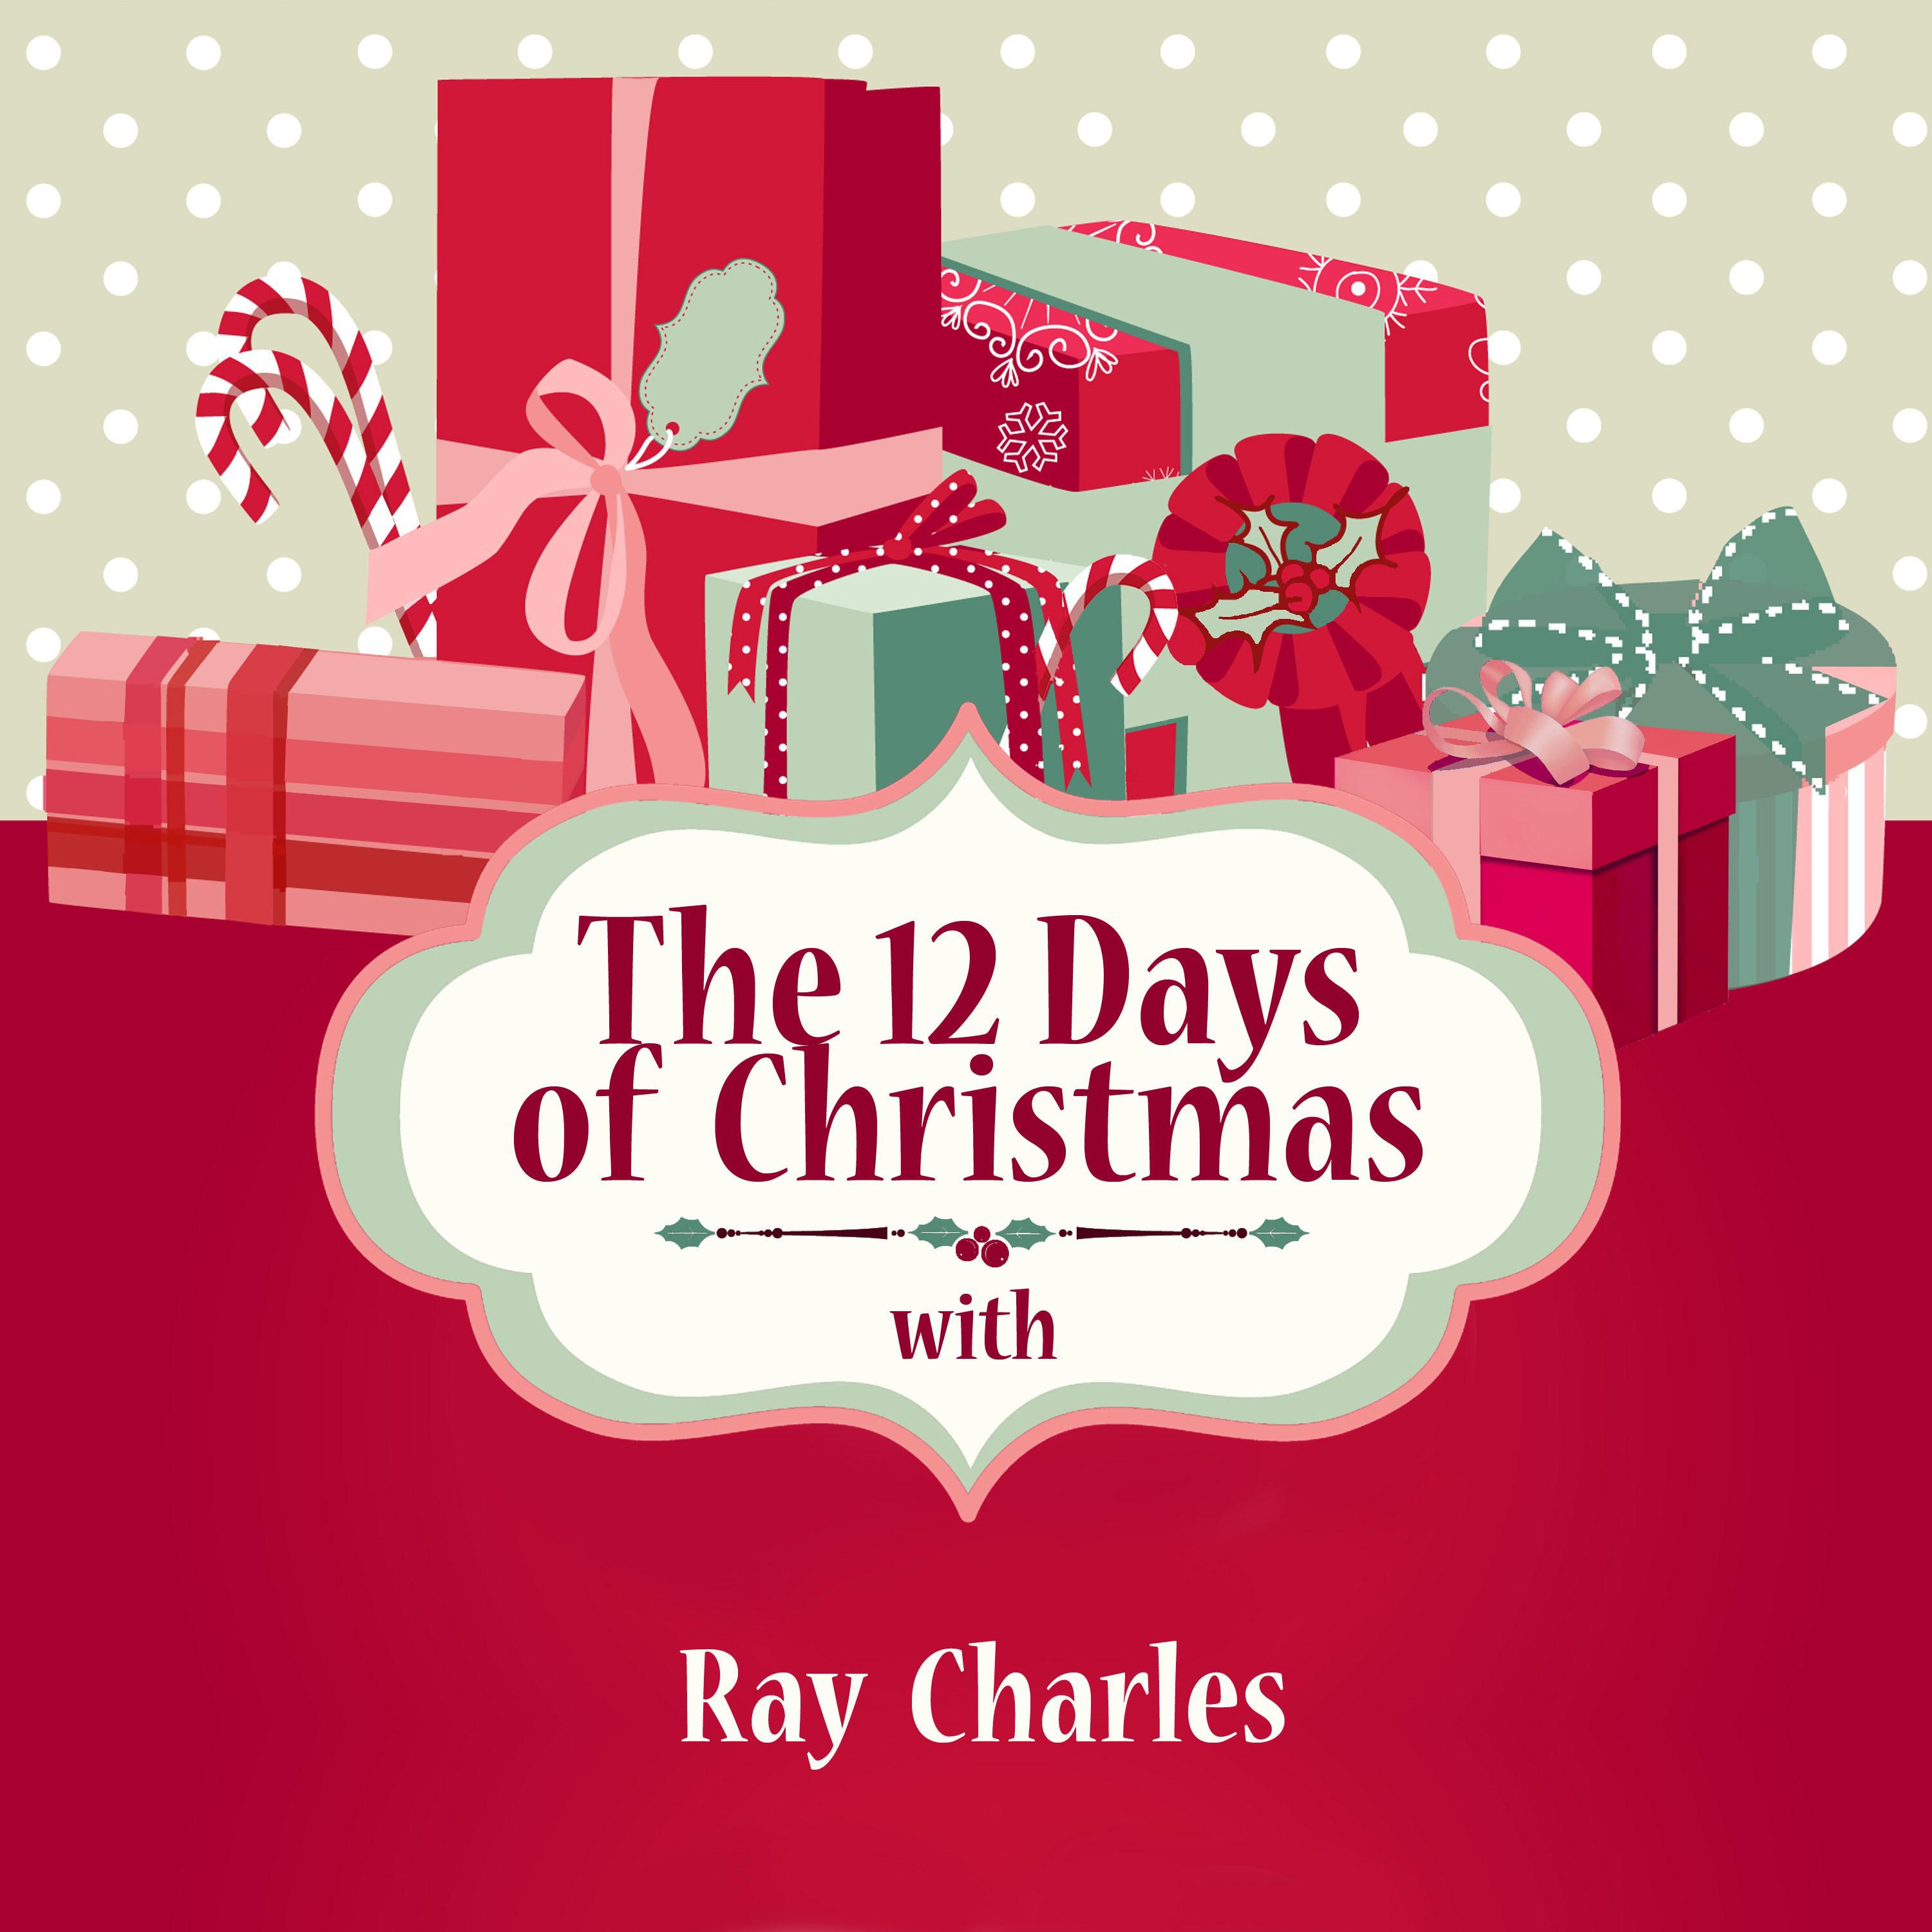 The 12 Days of Christmas with Ray Charles